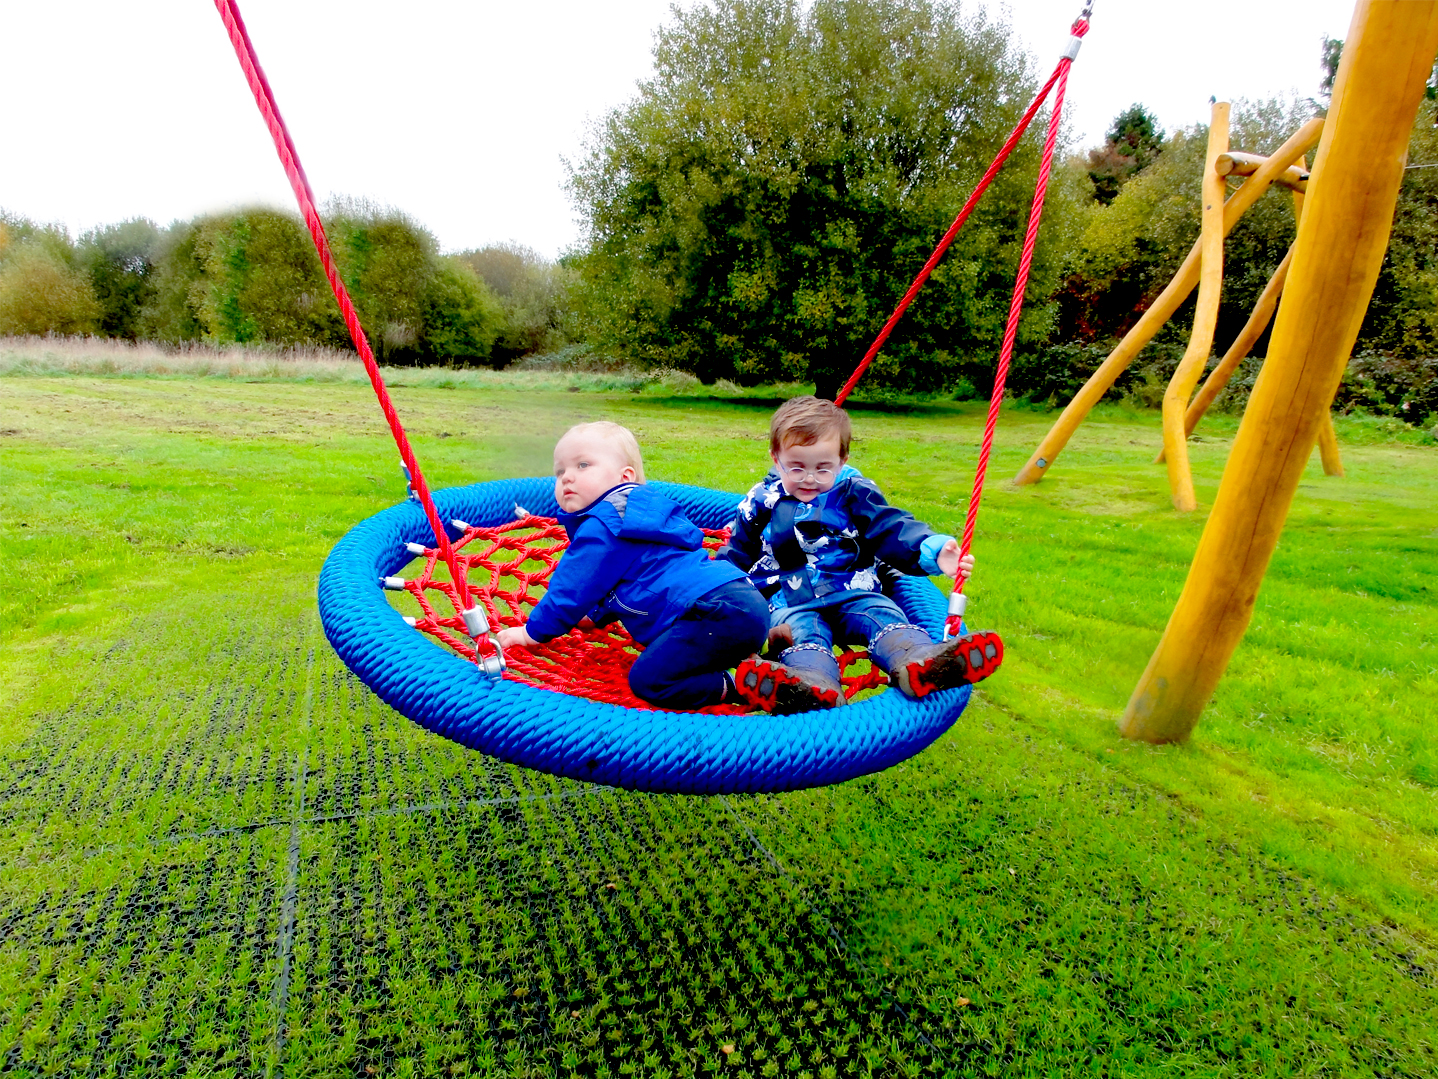 New Haw, Runnymede | The Children's Playground Company